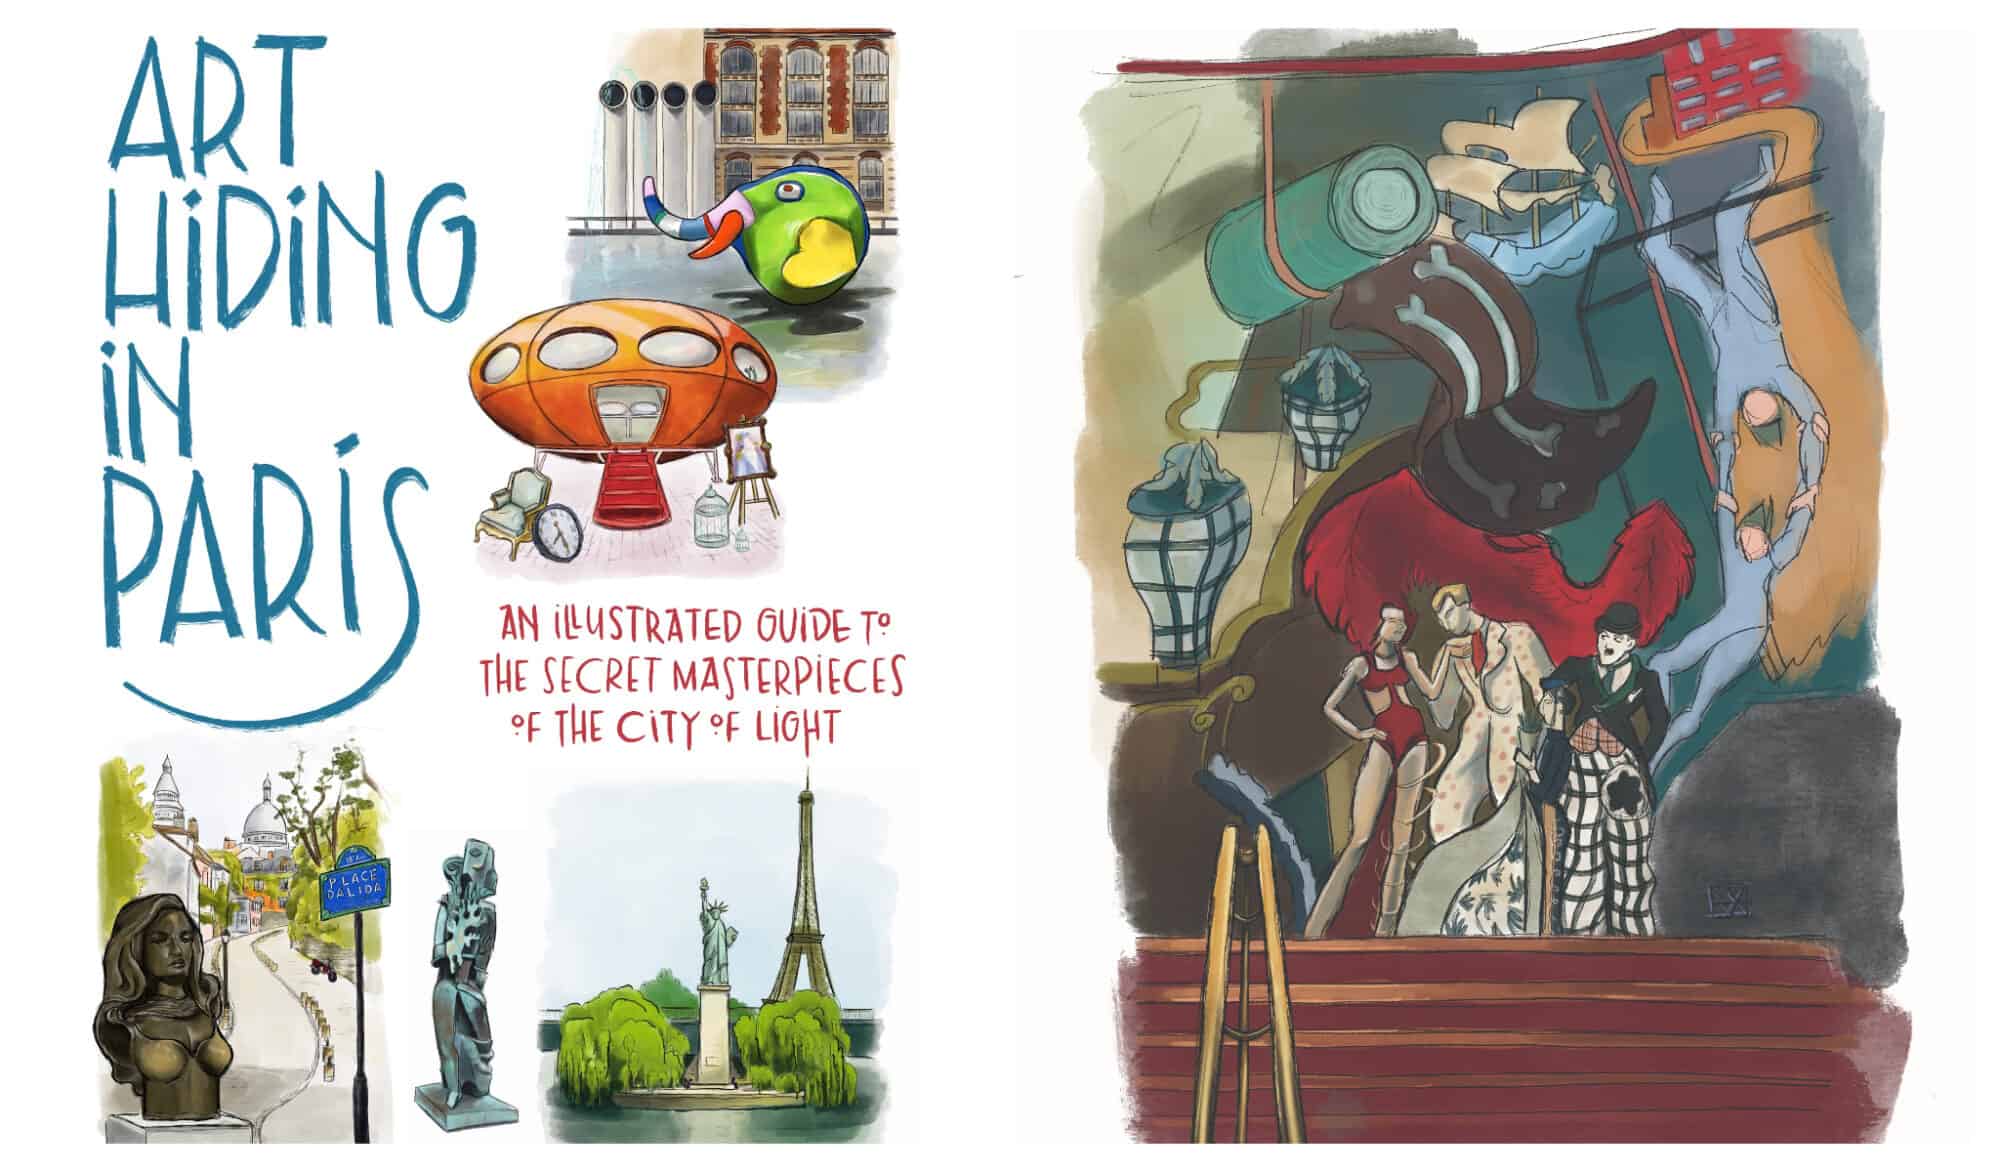 Left: The cover of the book "Art Hiding in Paris" with 4 illustrations of different colors. Right: An illustration of a mural in Paris in shades of red, green and yellow